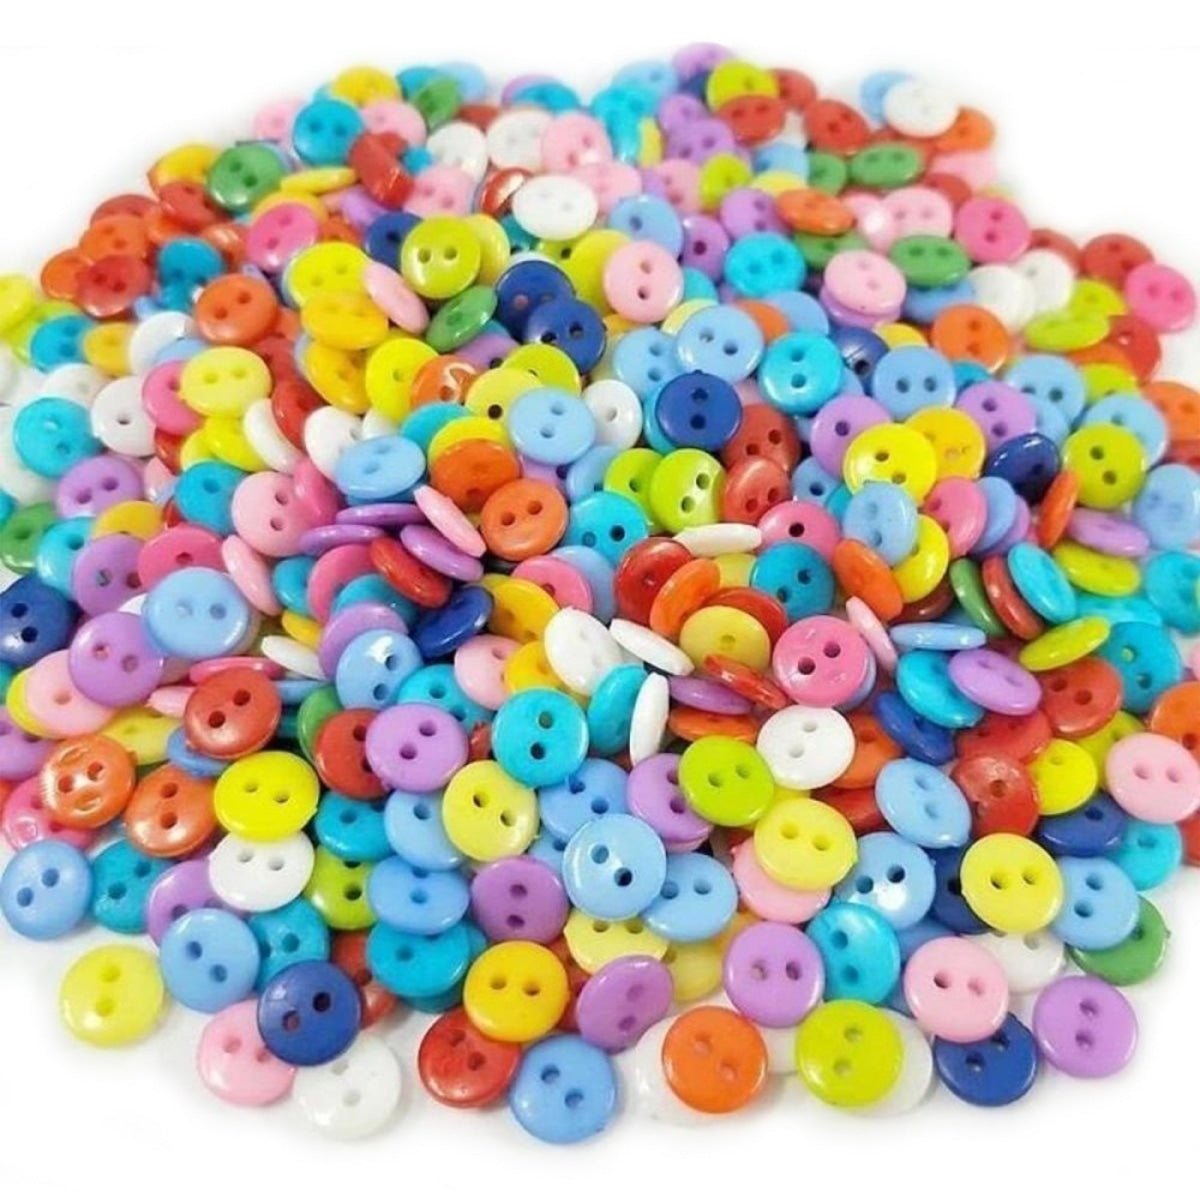 100pcs Buttons 6mm 7mm 10mm Multicoloured Mixed Colour Clothing Sewing - 7mm Set 2 - - Asia Sell